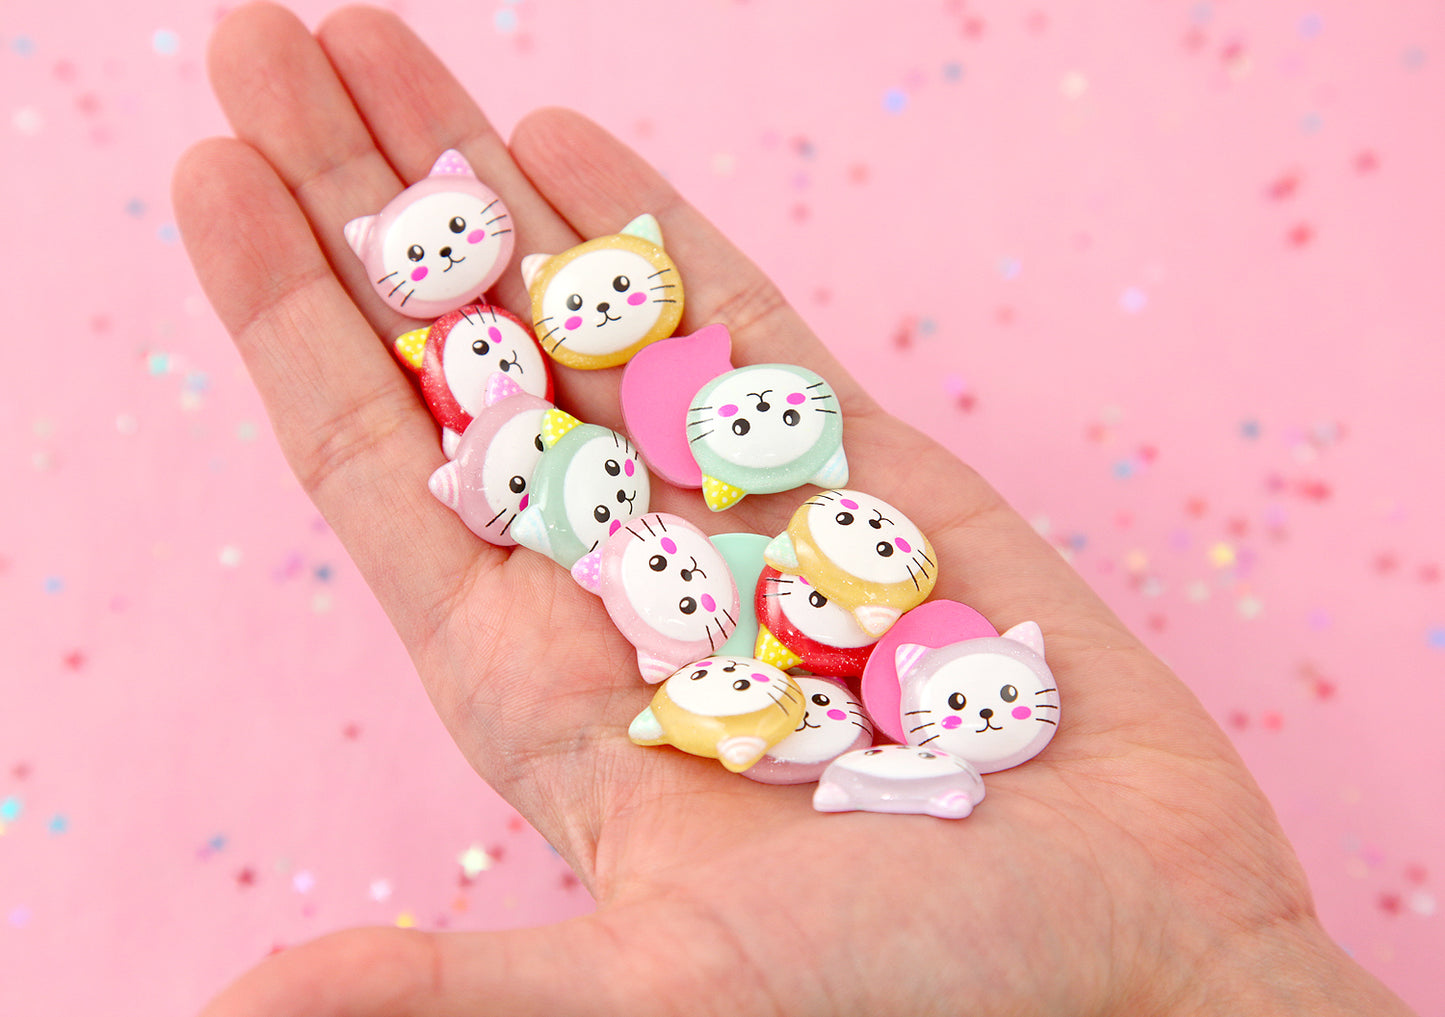 Kitty Cabochon - 20mm Colorful Kitty Cat Multi Color Flat Back Resin Cabochons - 12 pc set